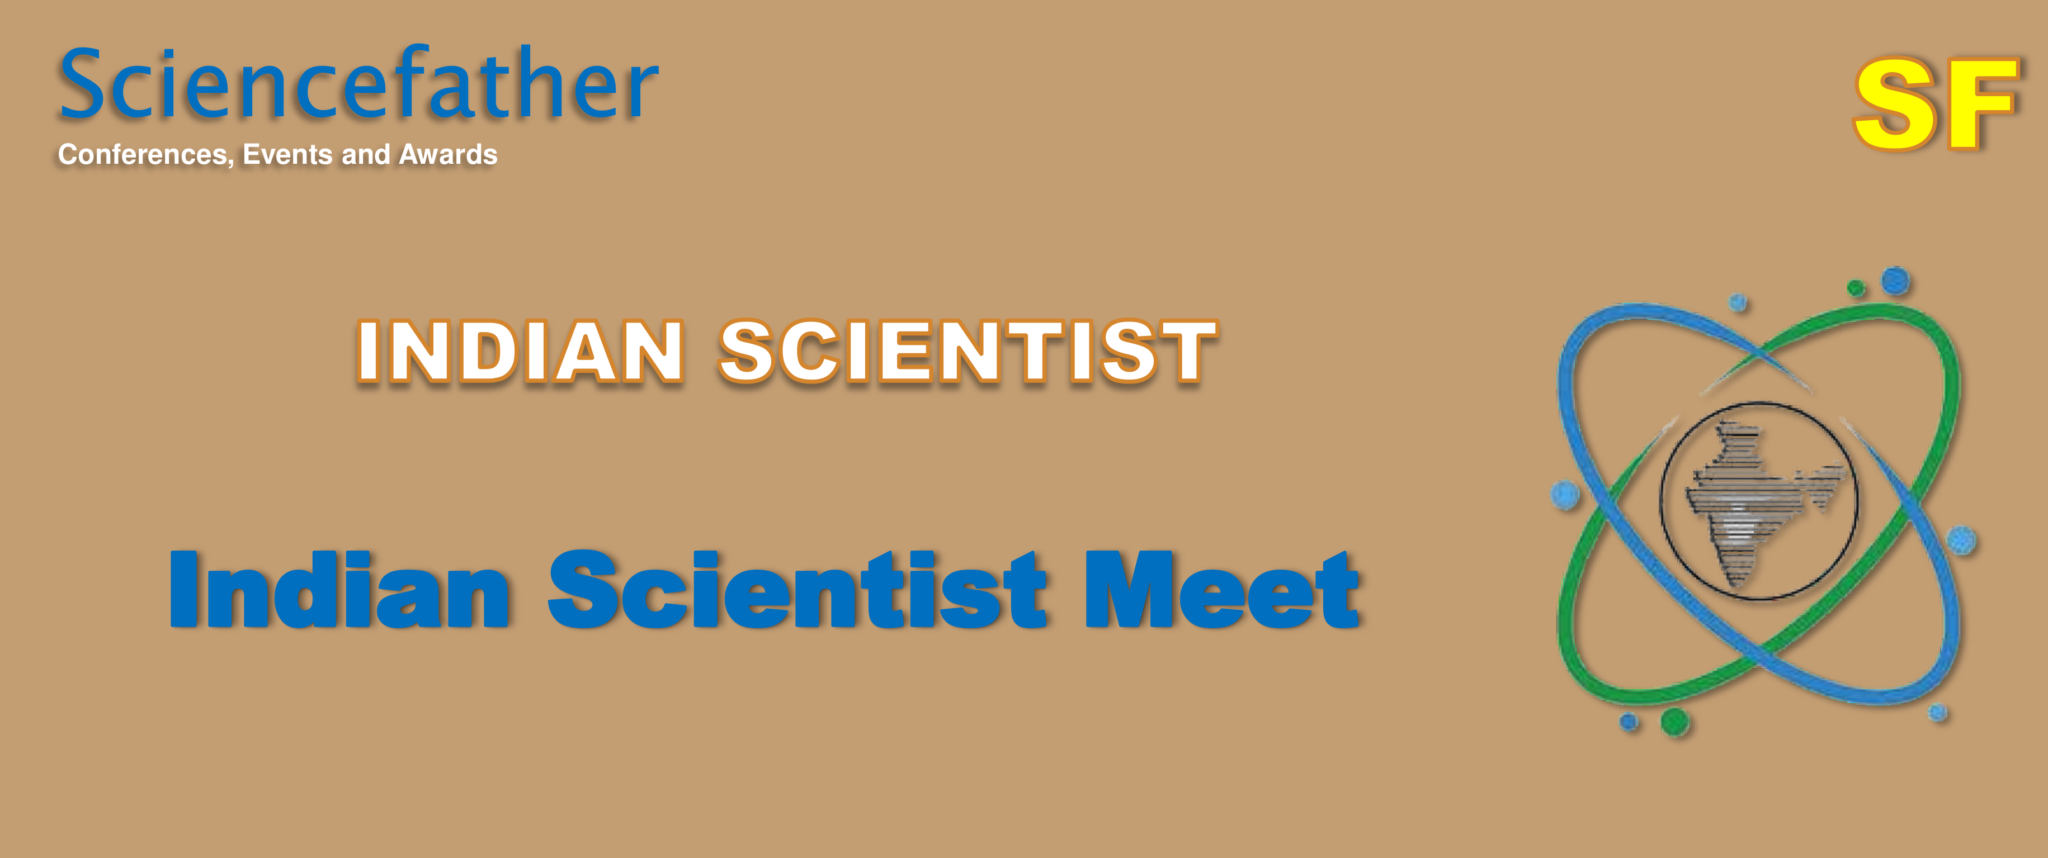 9 Edition of Indian Scientist Meet, Online Event